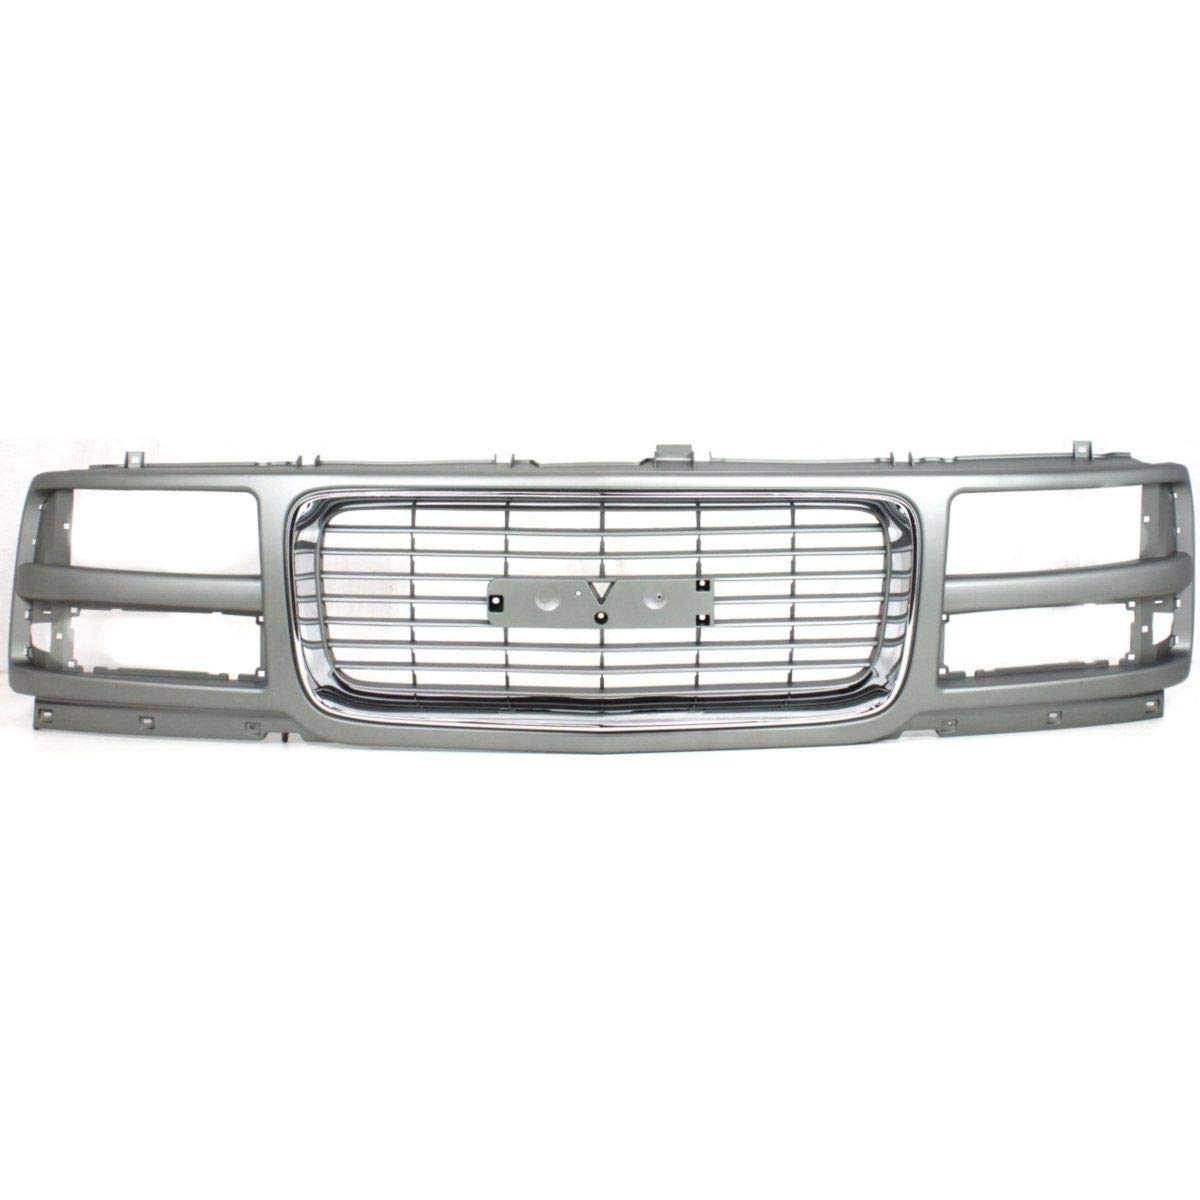 Amazon.com: Fitrite Autoparts New Grille For 1996-2002 GMC Savana Van,  Painted Gray Shell and Insert, Base/SL/SLE Models, With Chrome Insert  Opening Molding, With Composite HL GM1200528 15037244 : Automotive